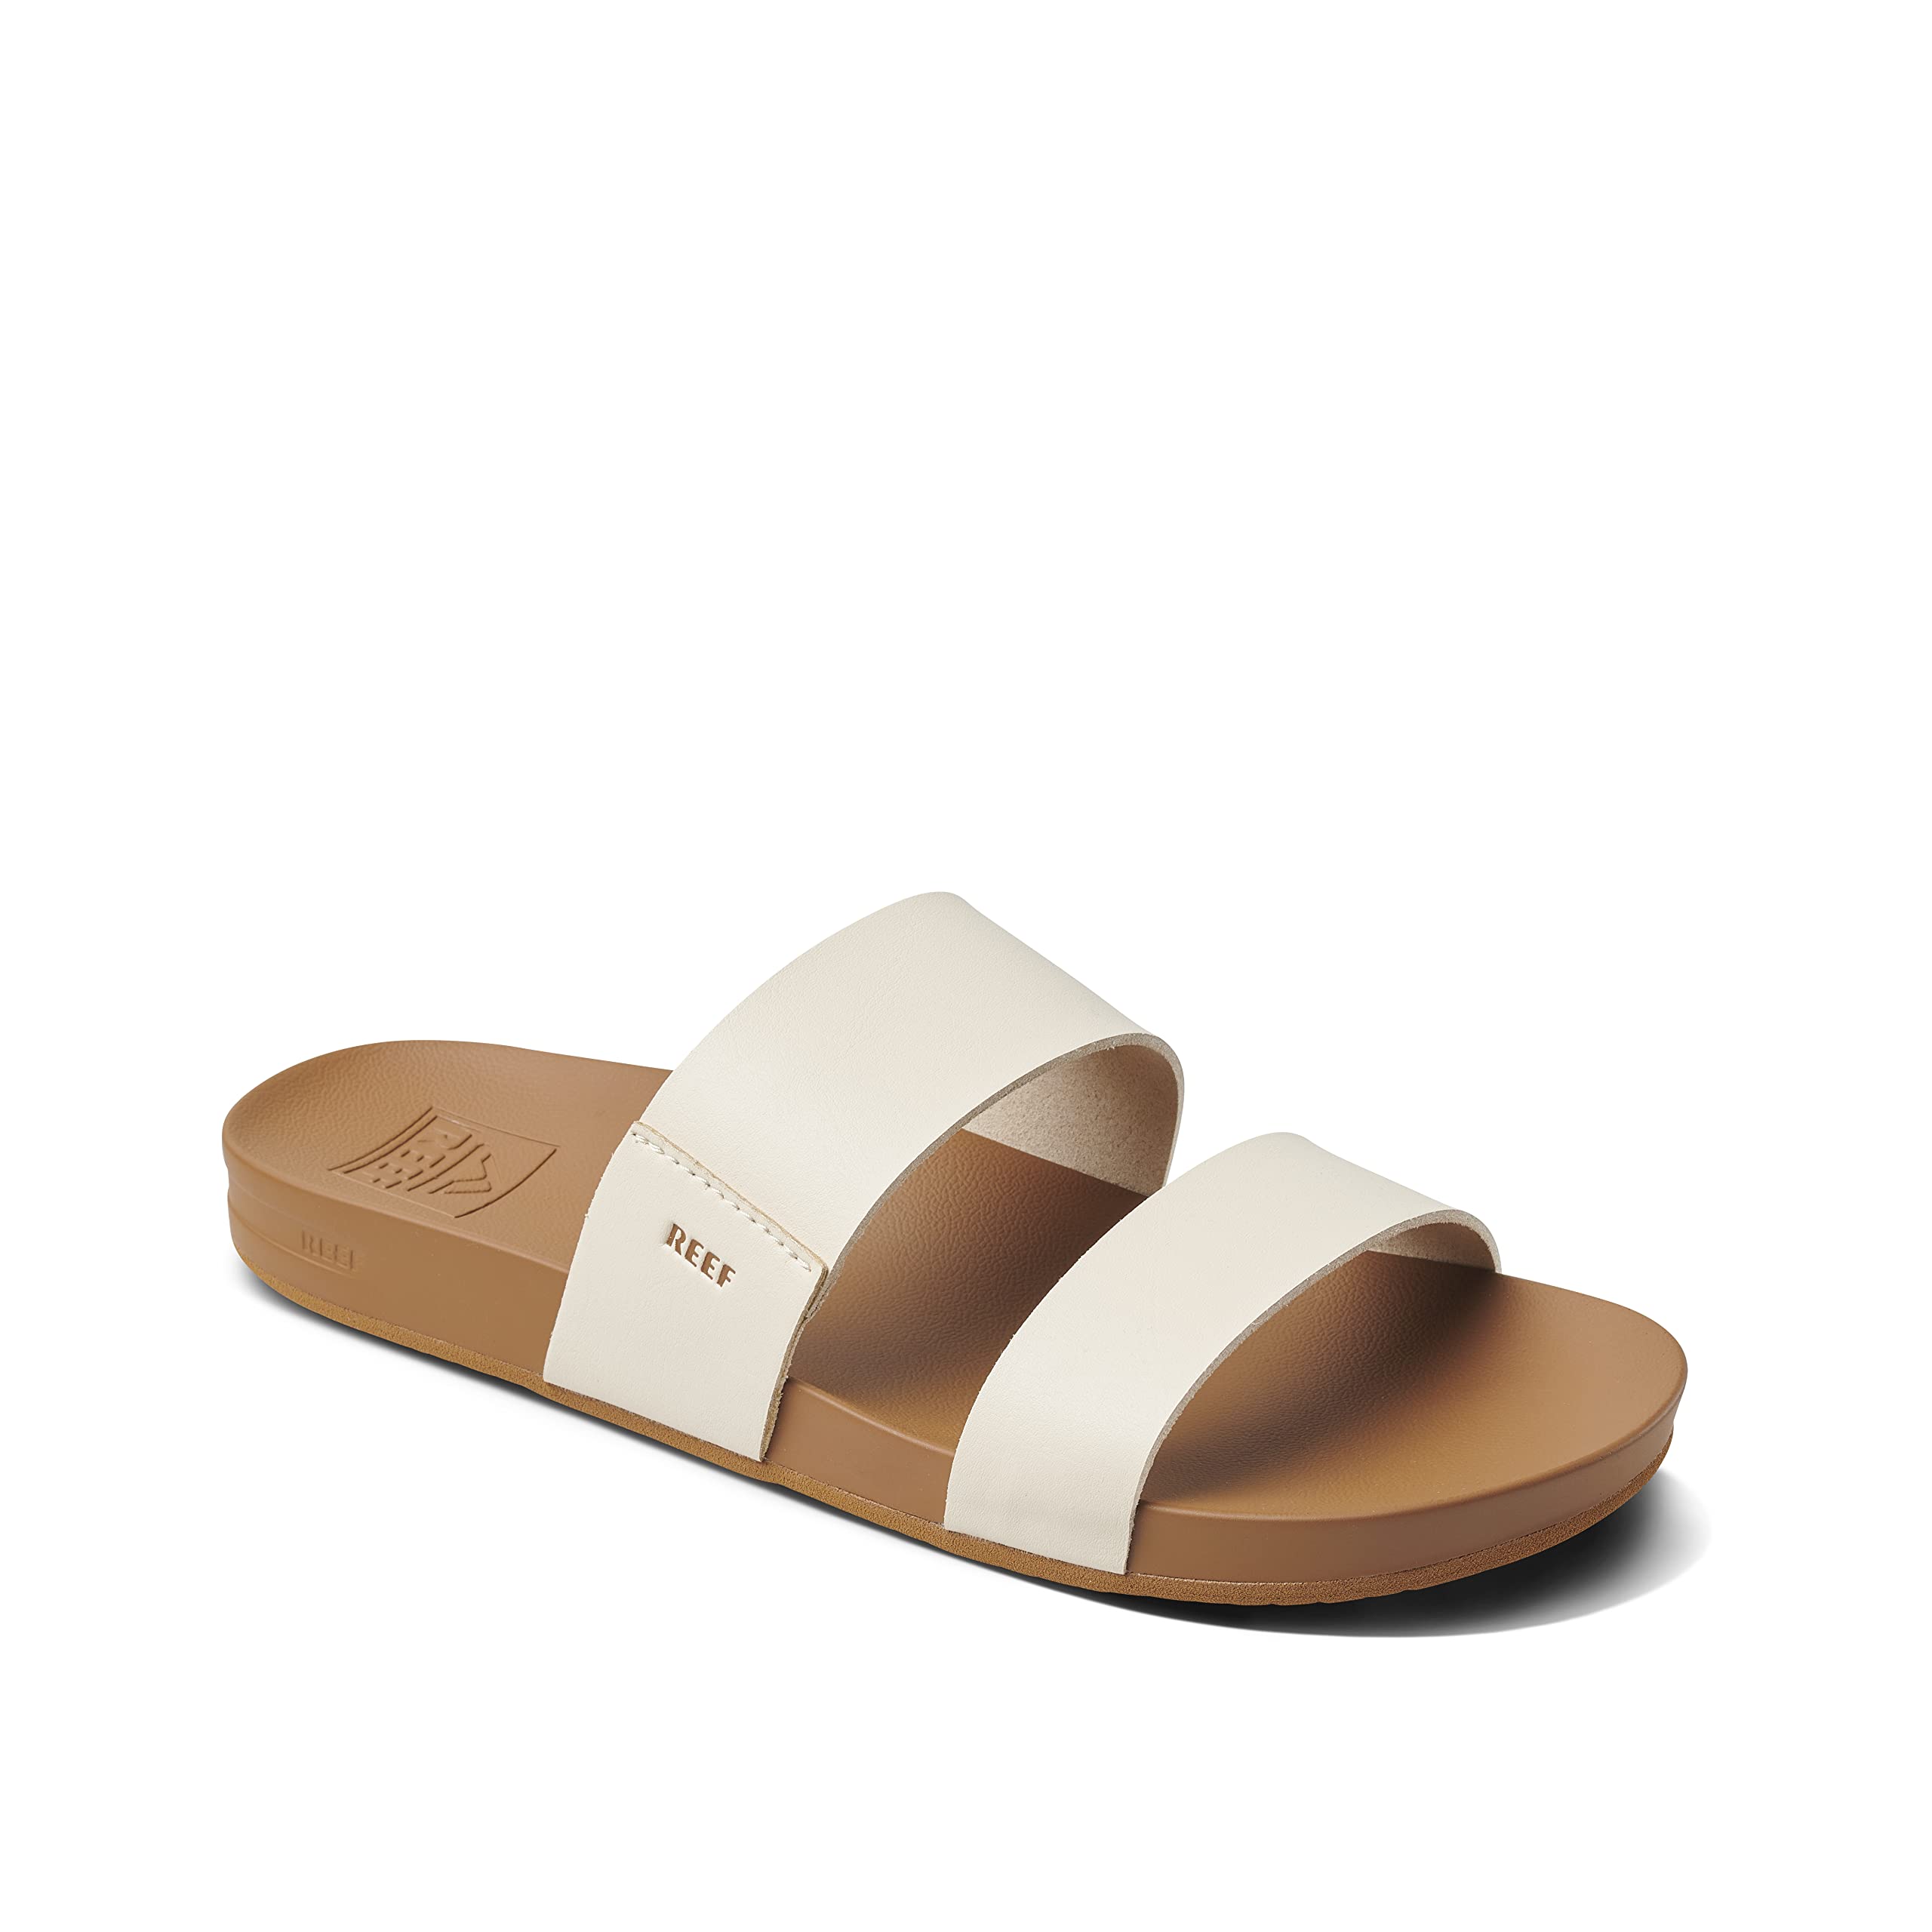 Reef Womens Sandals Vista | Vegan Leather Slides for Women With Cushion Bounce Footbed